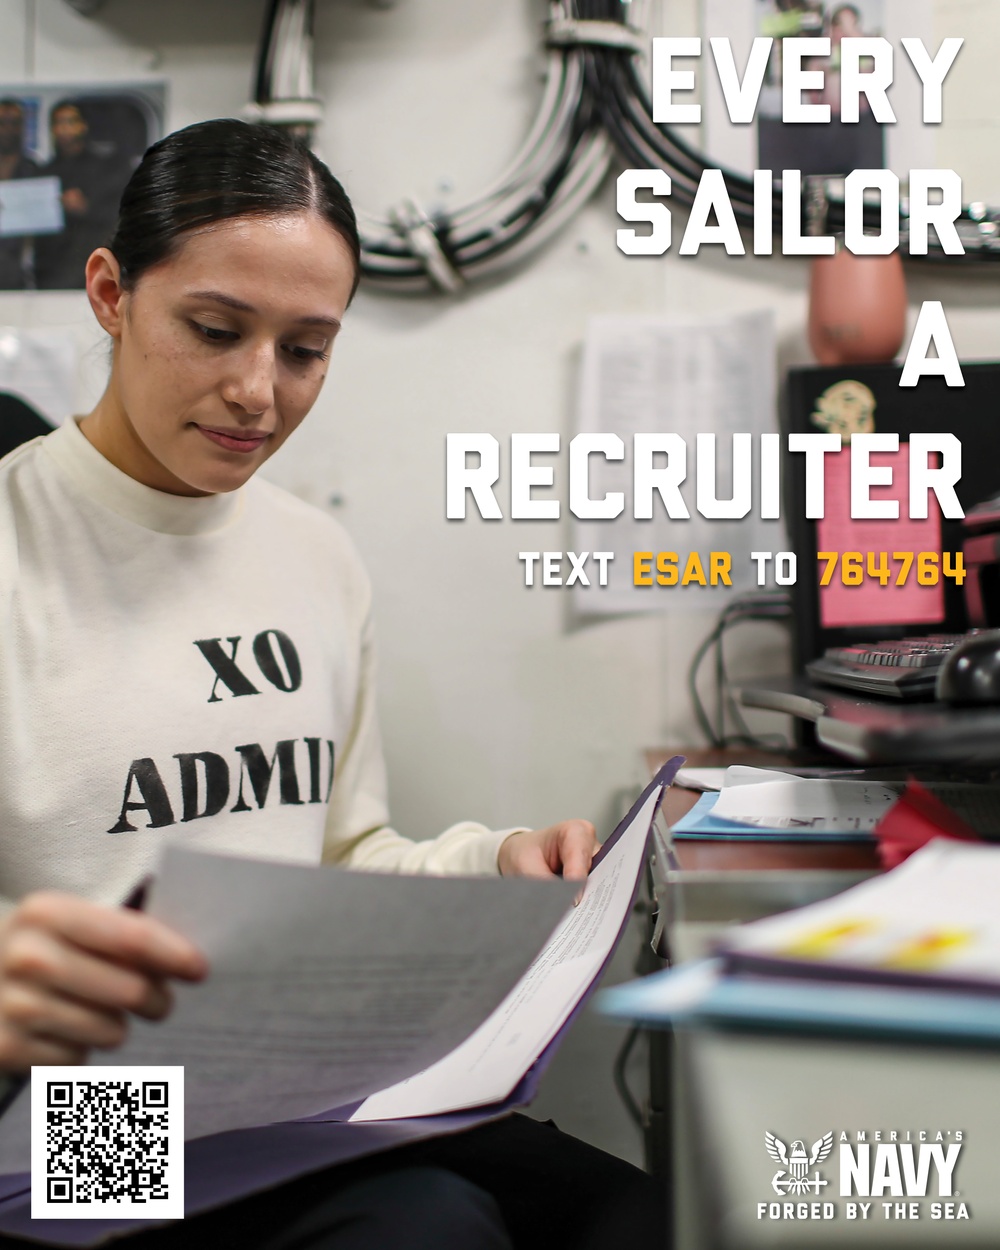 Every Sailor is a Recruiter